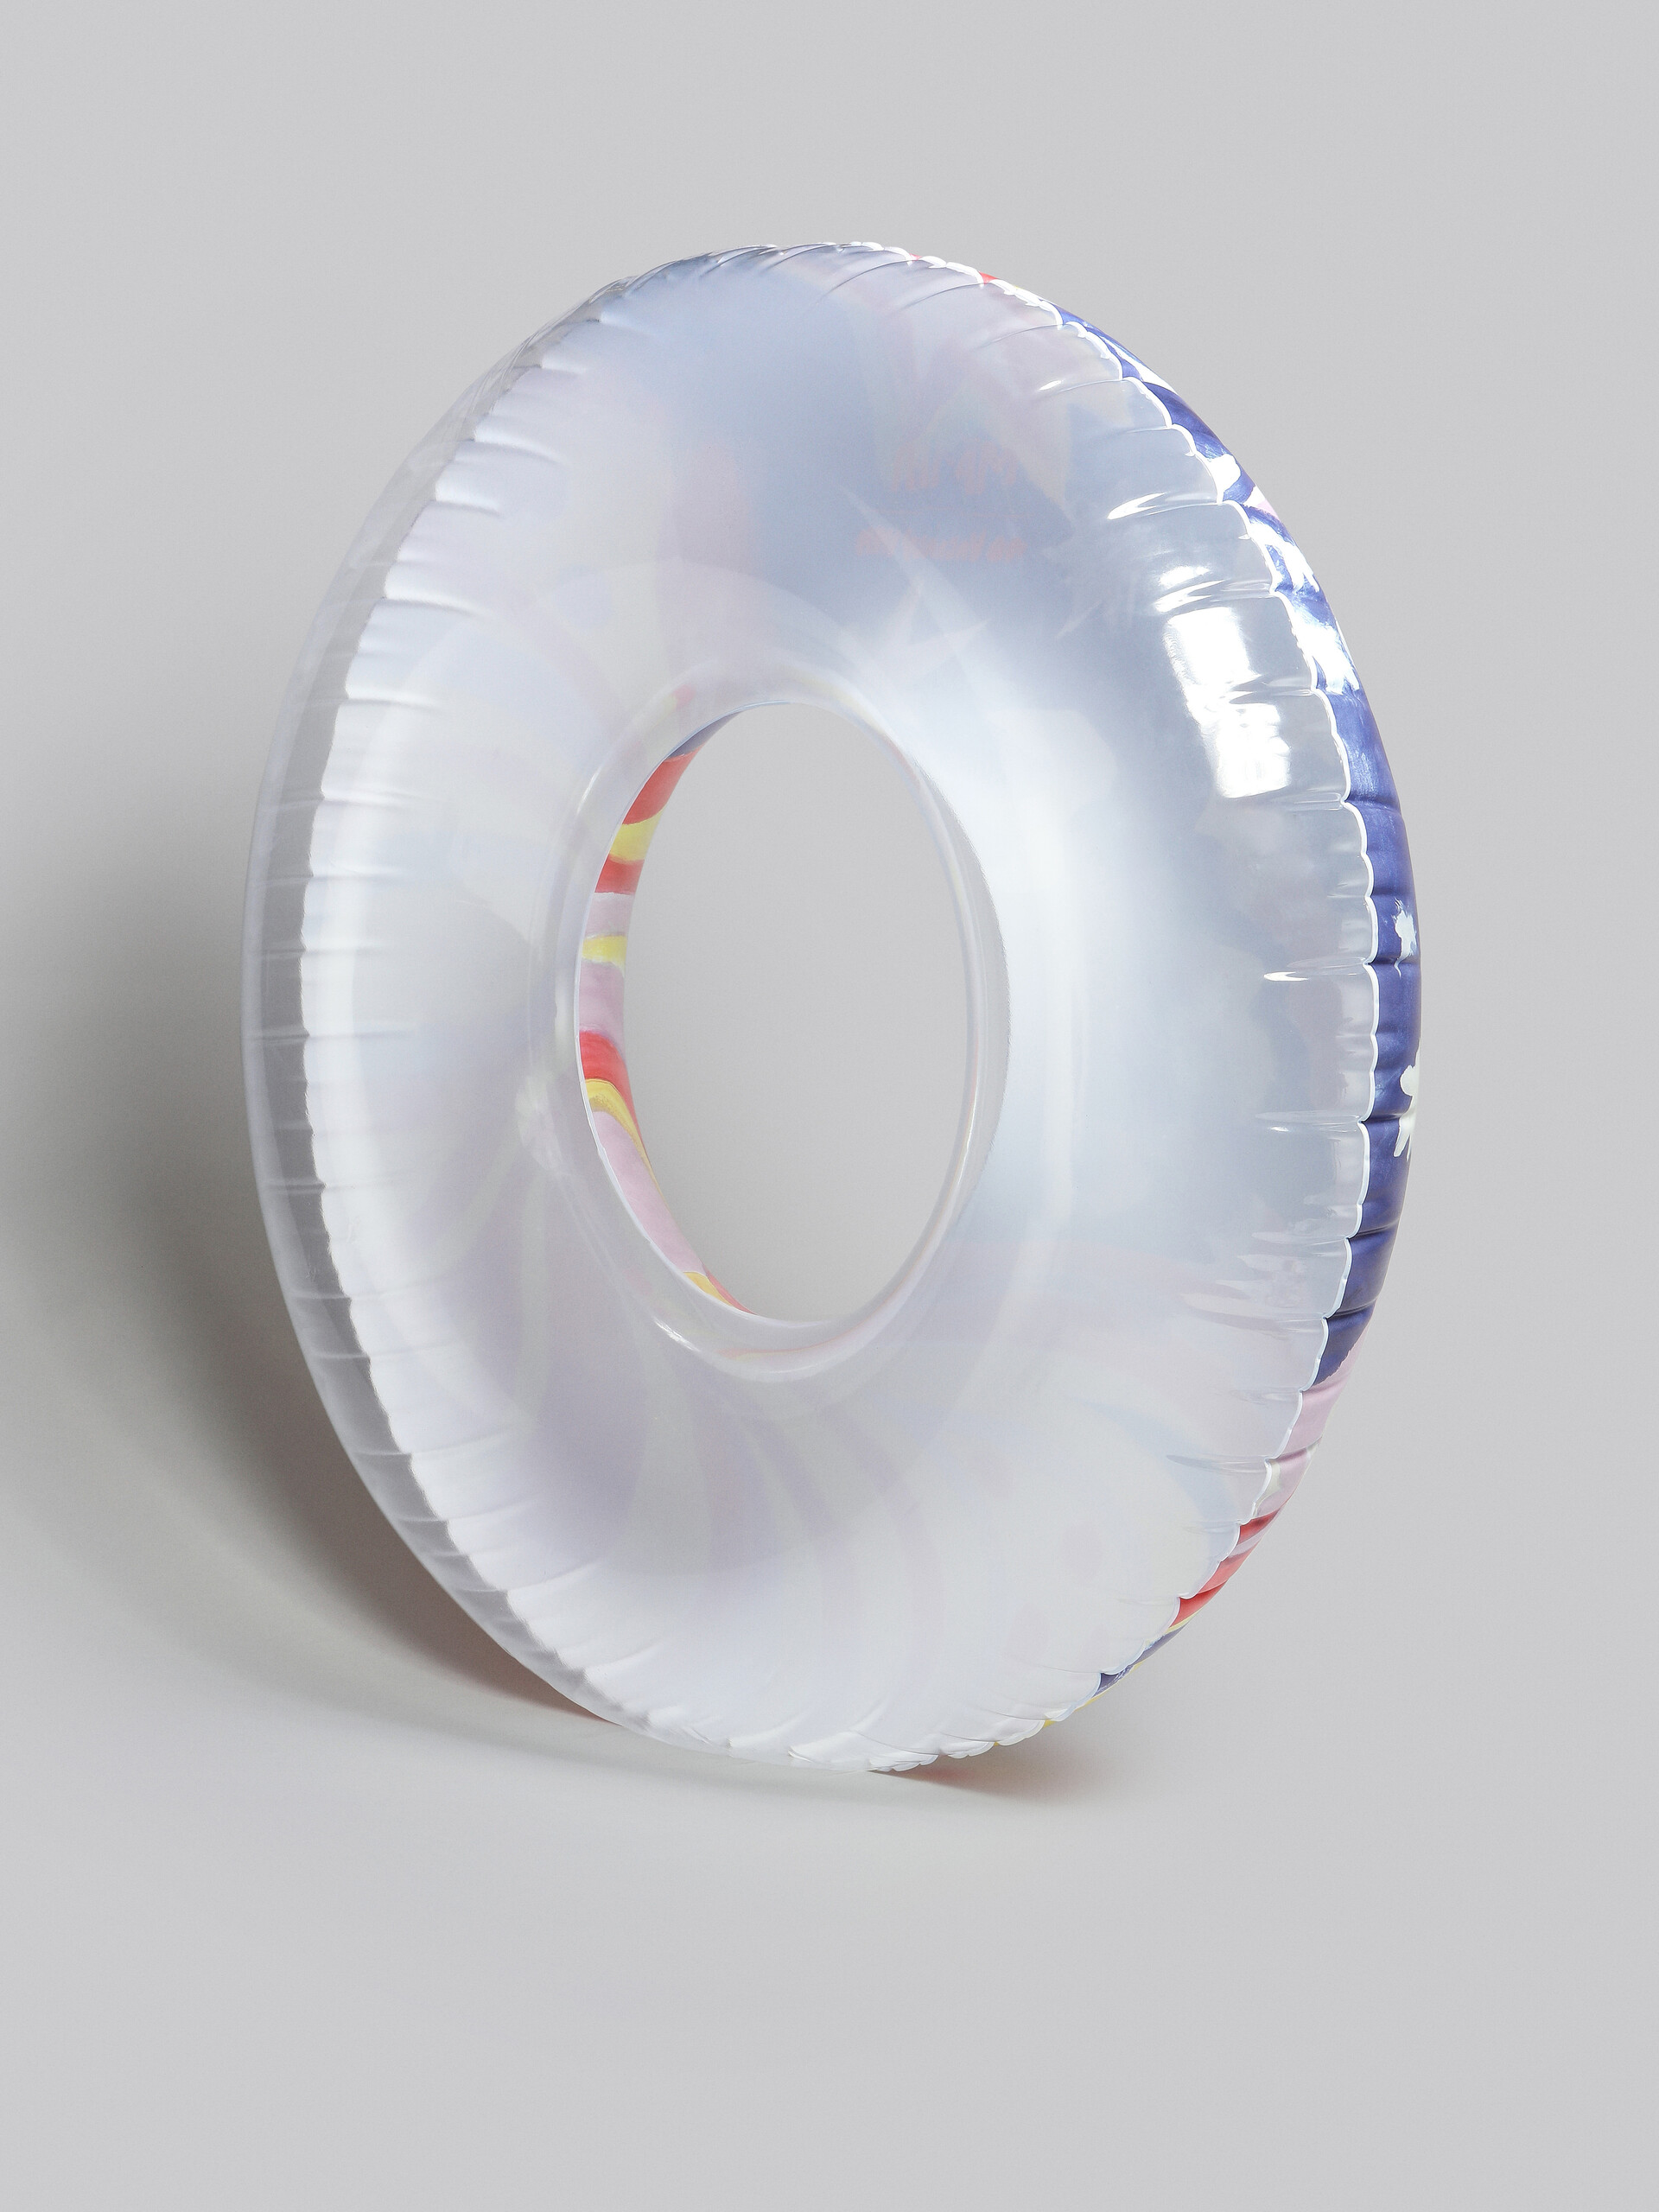 Marni x No Vacancy Inn - Inflatable ring with Galactic Paradise print - Other accessories - Image 3